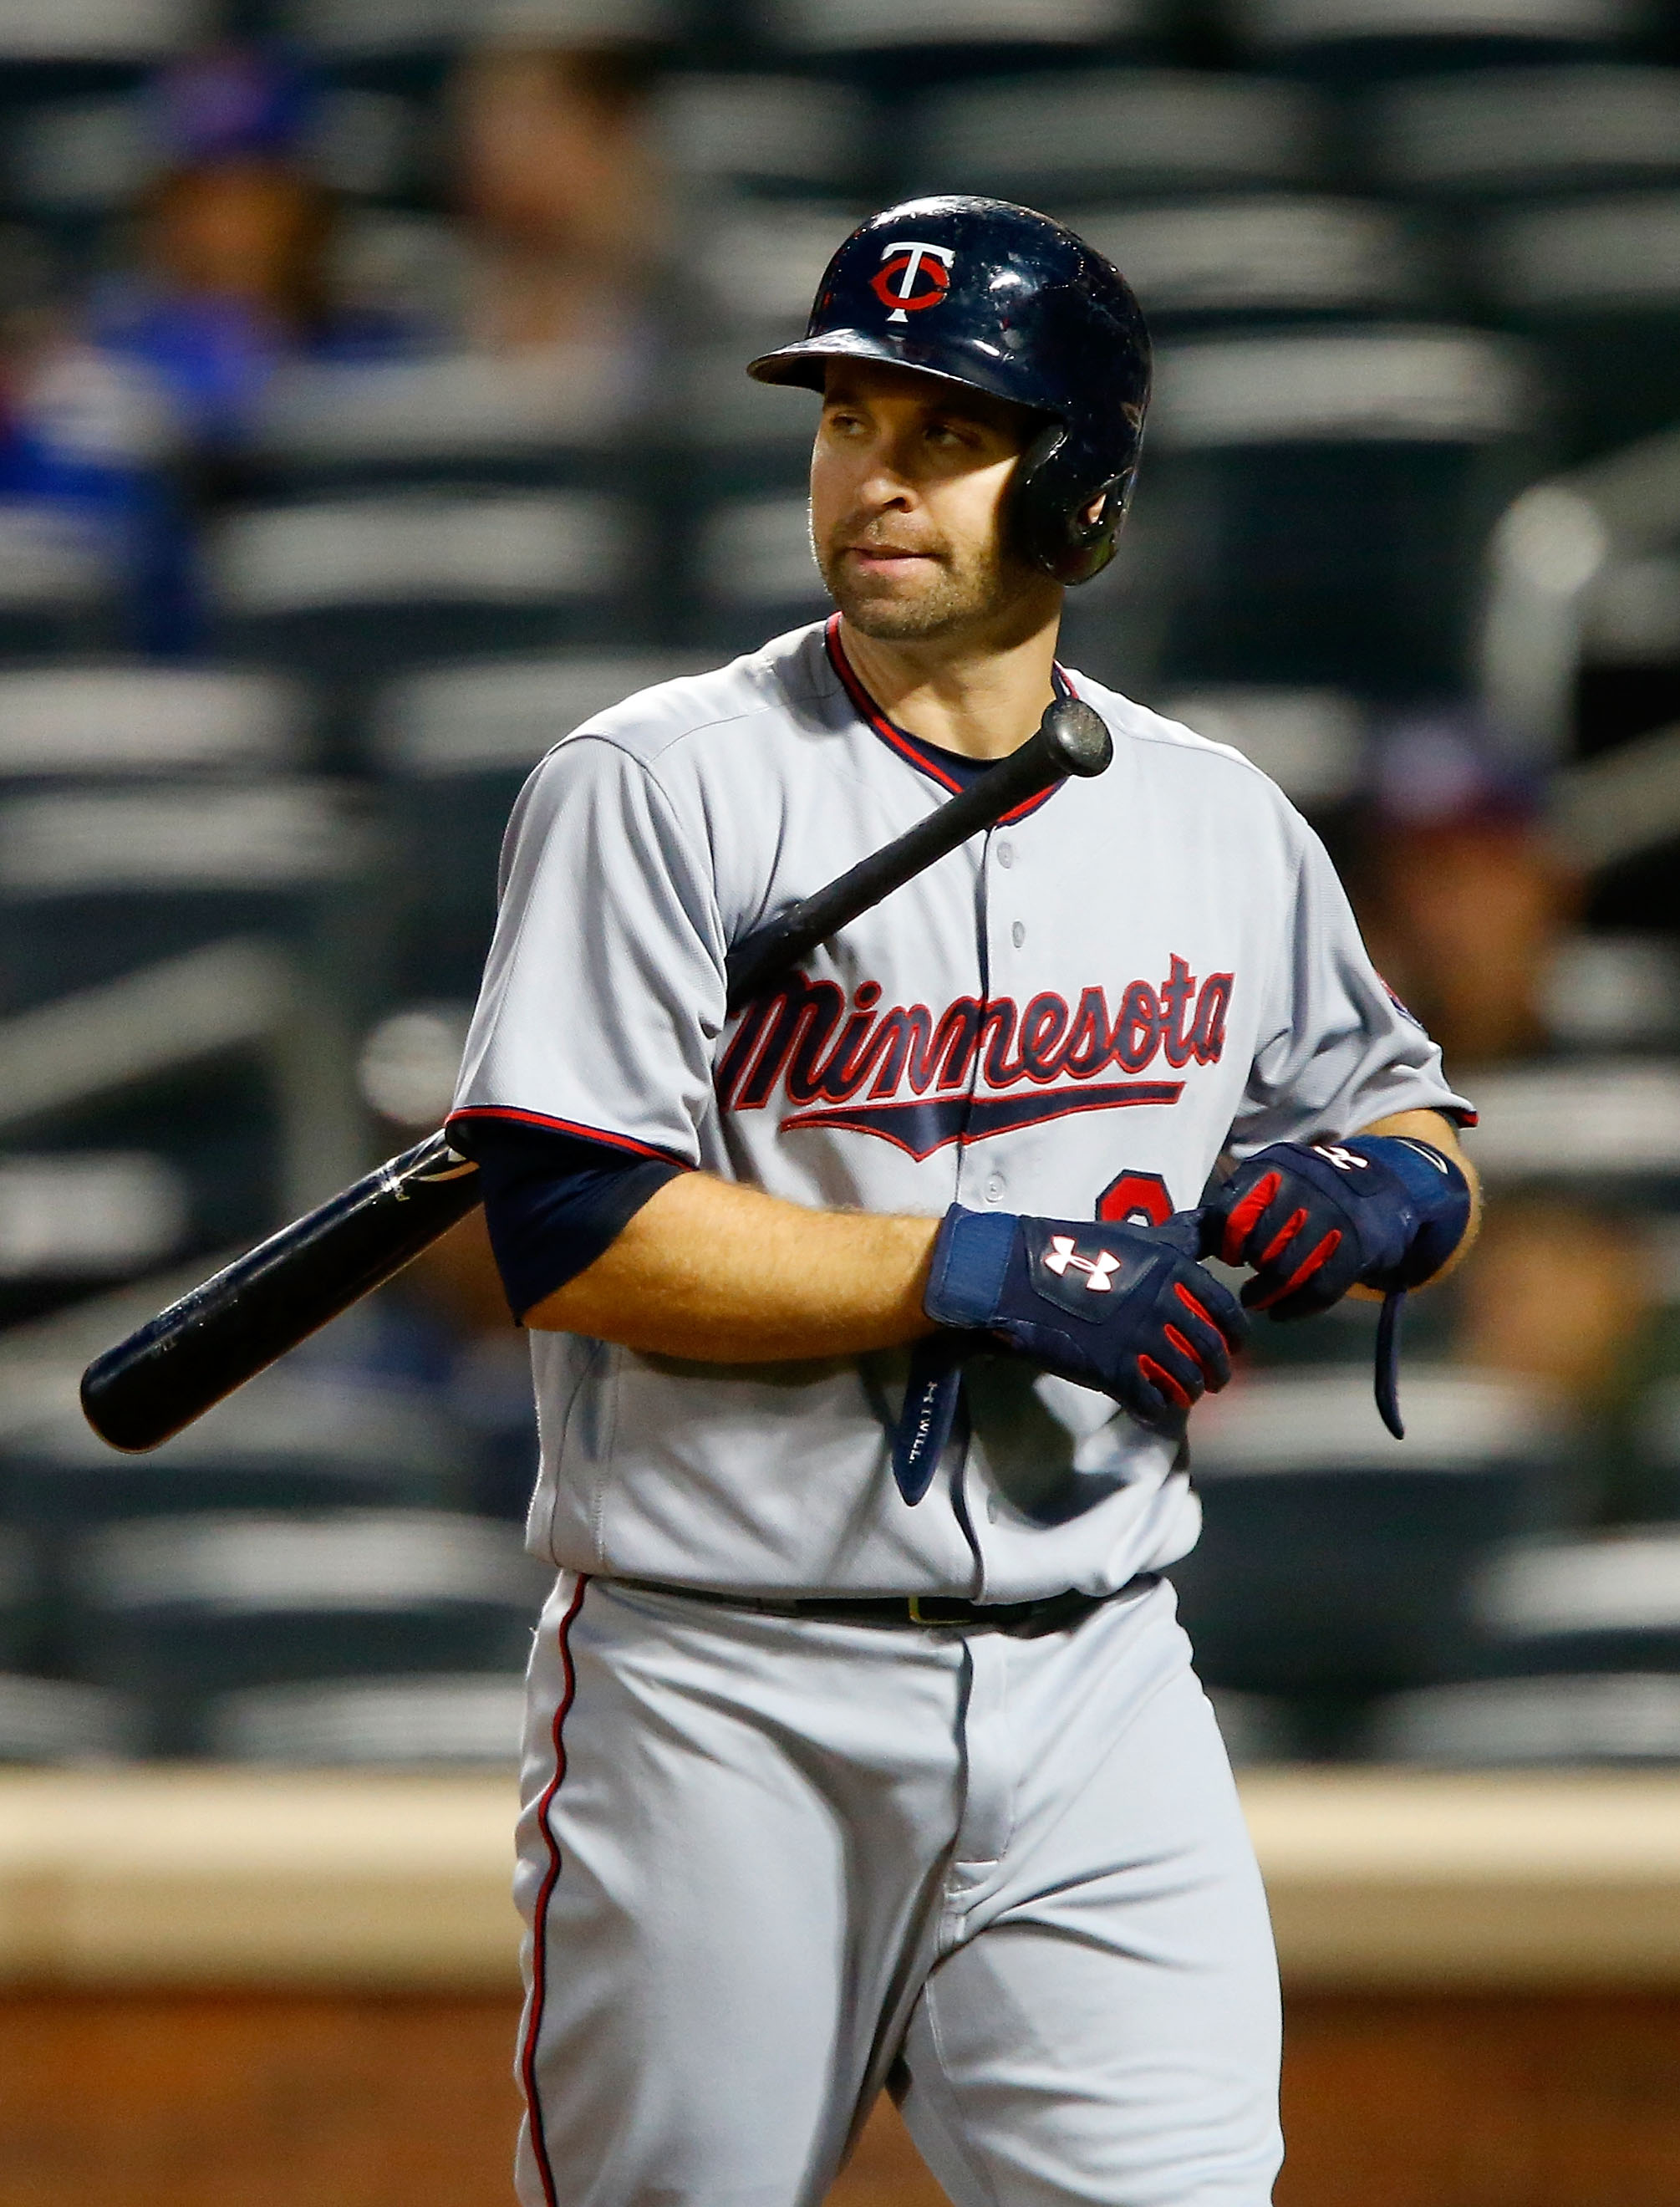 Twins host awards, Brian Dozier wins everything, Terry Ryan pitied